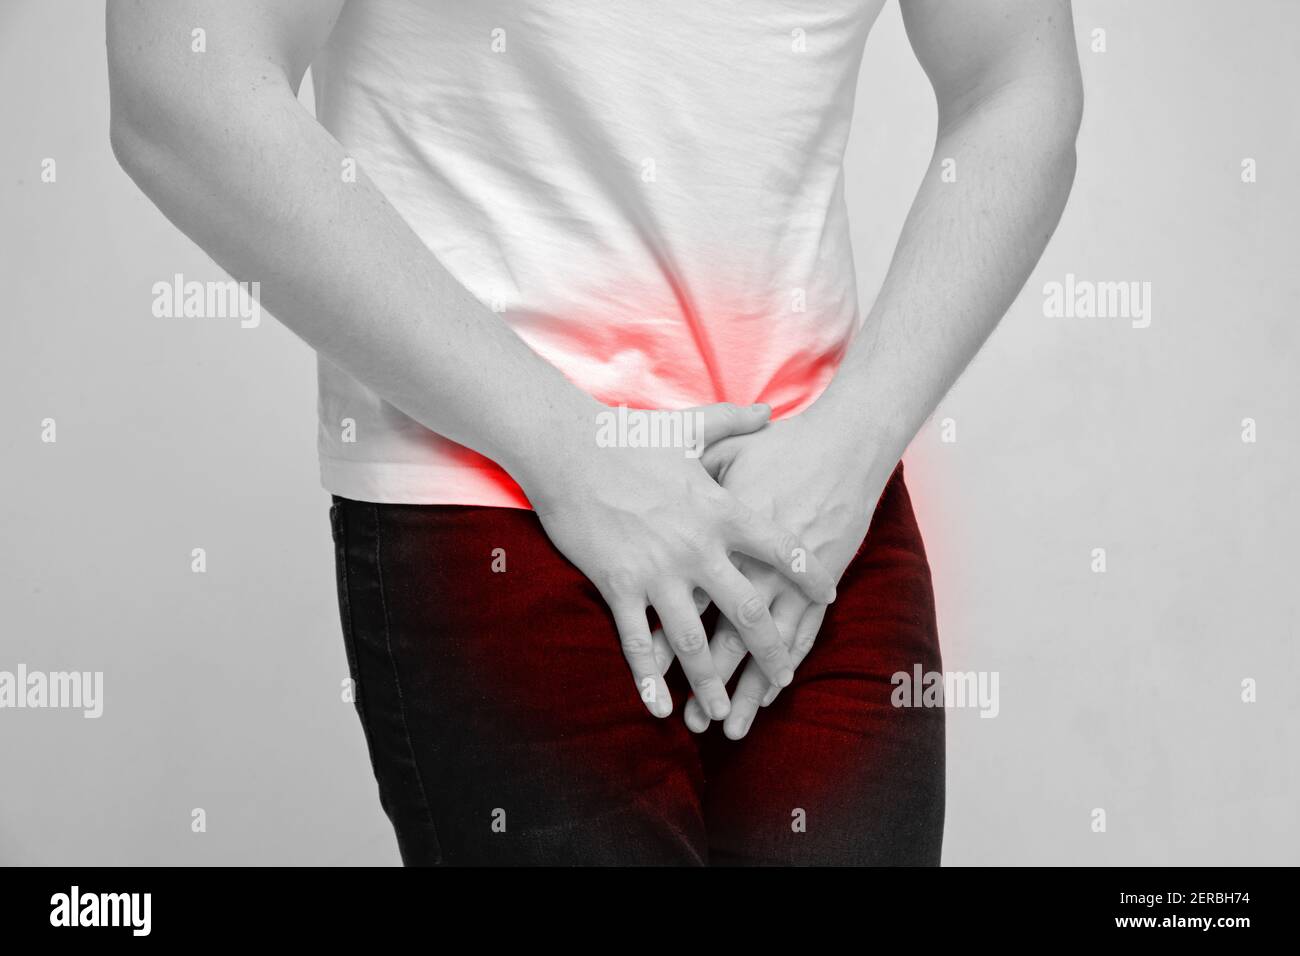 Person experiencing pain from prostate gland and urination. Stock Photo